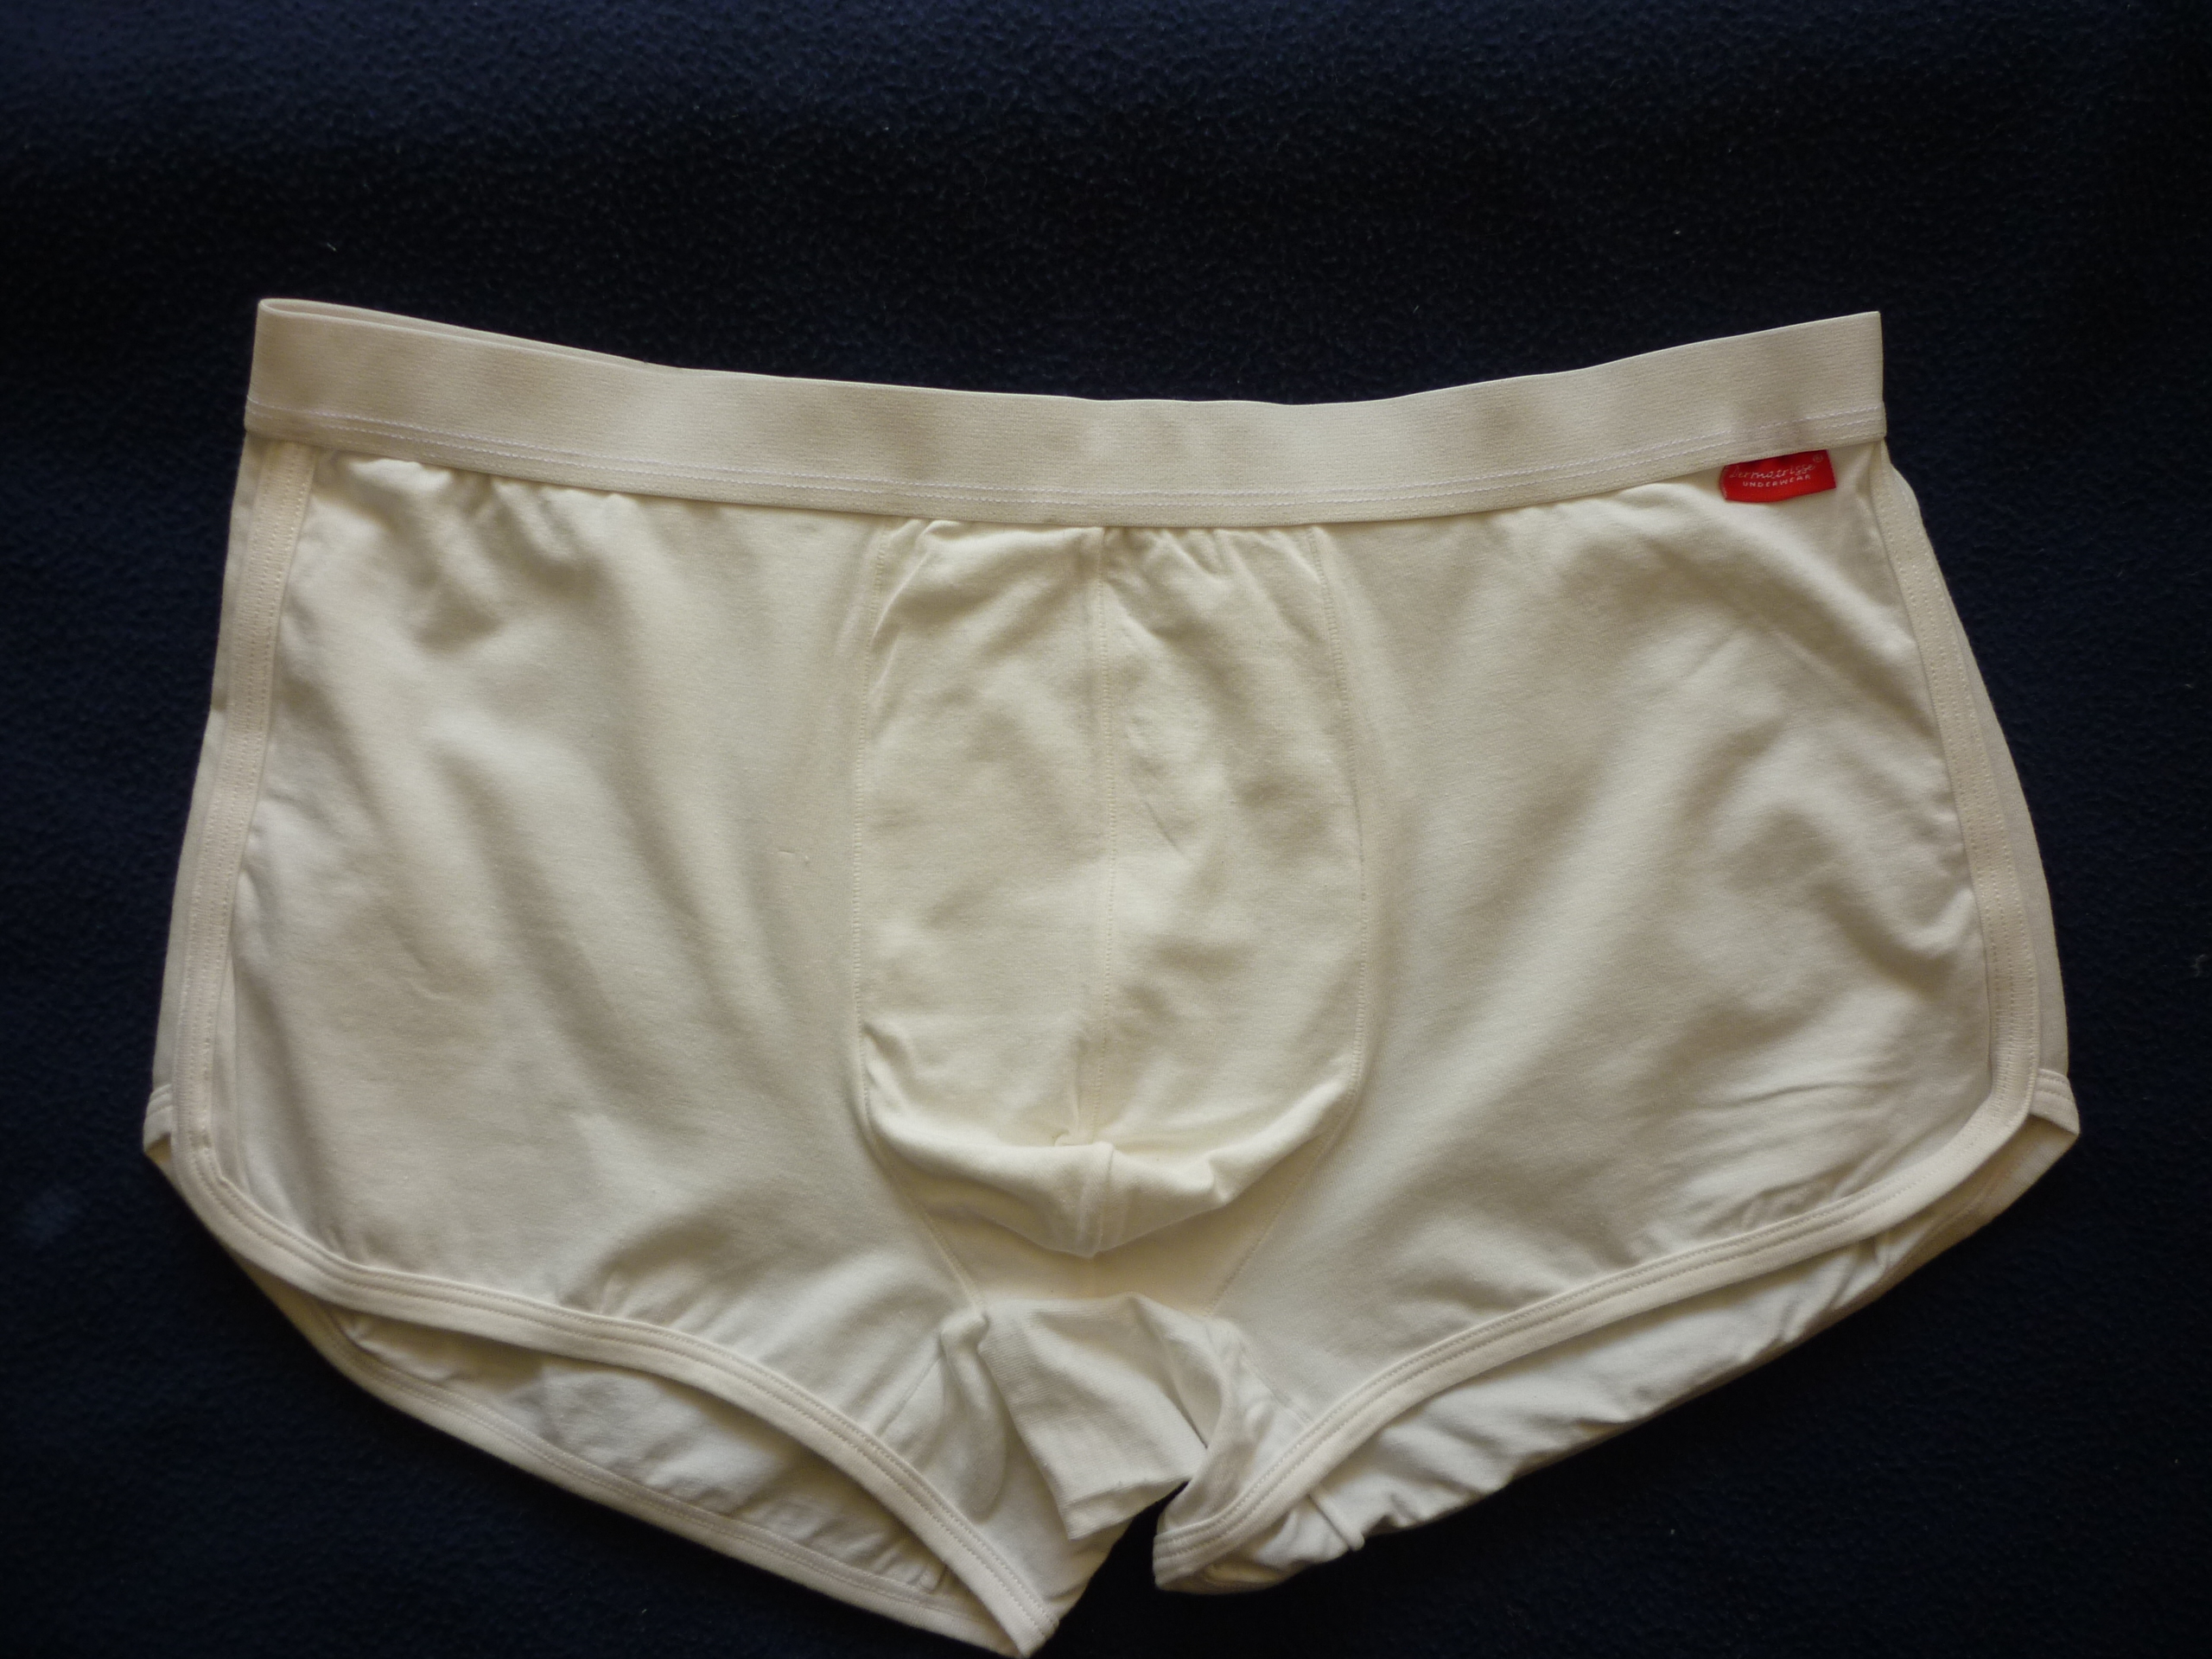 MEN'S UNDERWEAR (BRIEF) II GUARANTEED TOP QUALITY II OFF WHITE IIDON'T MISS THIS CHANCE-3 Pcs.II FREE HOME DELIVERY(POST NORD)IIDISCOUNT 35% IIART.No.190822-1060334